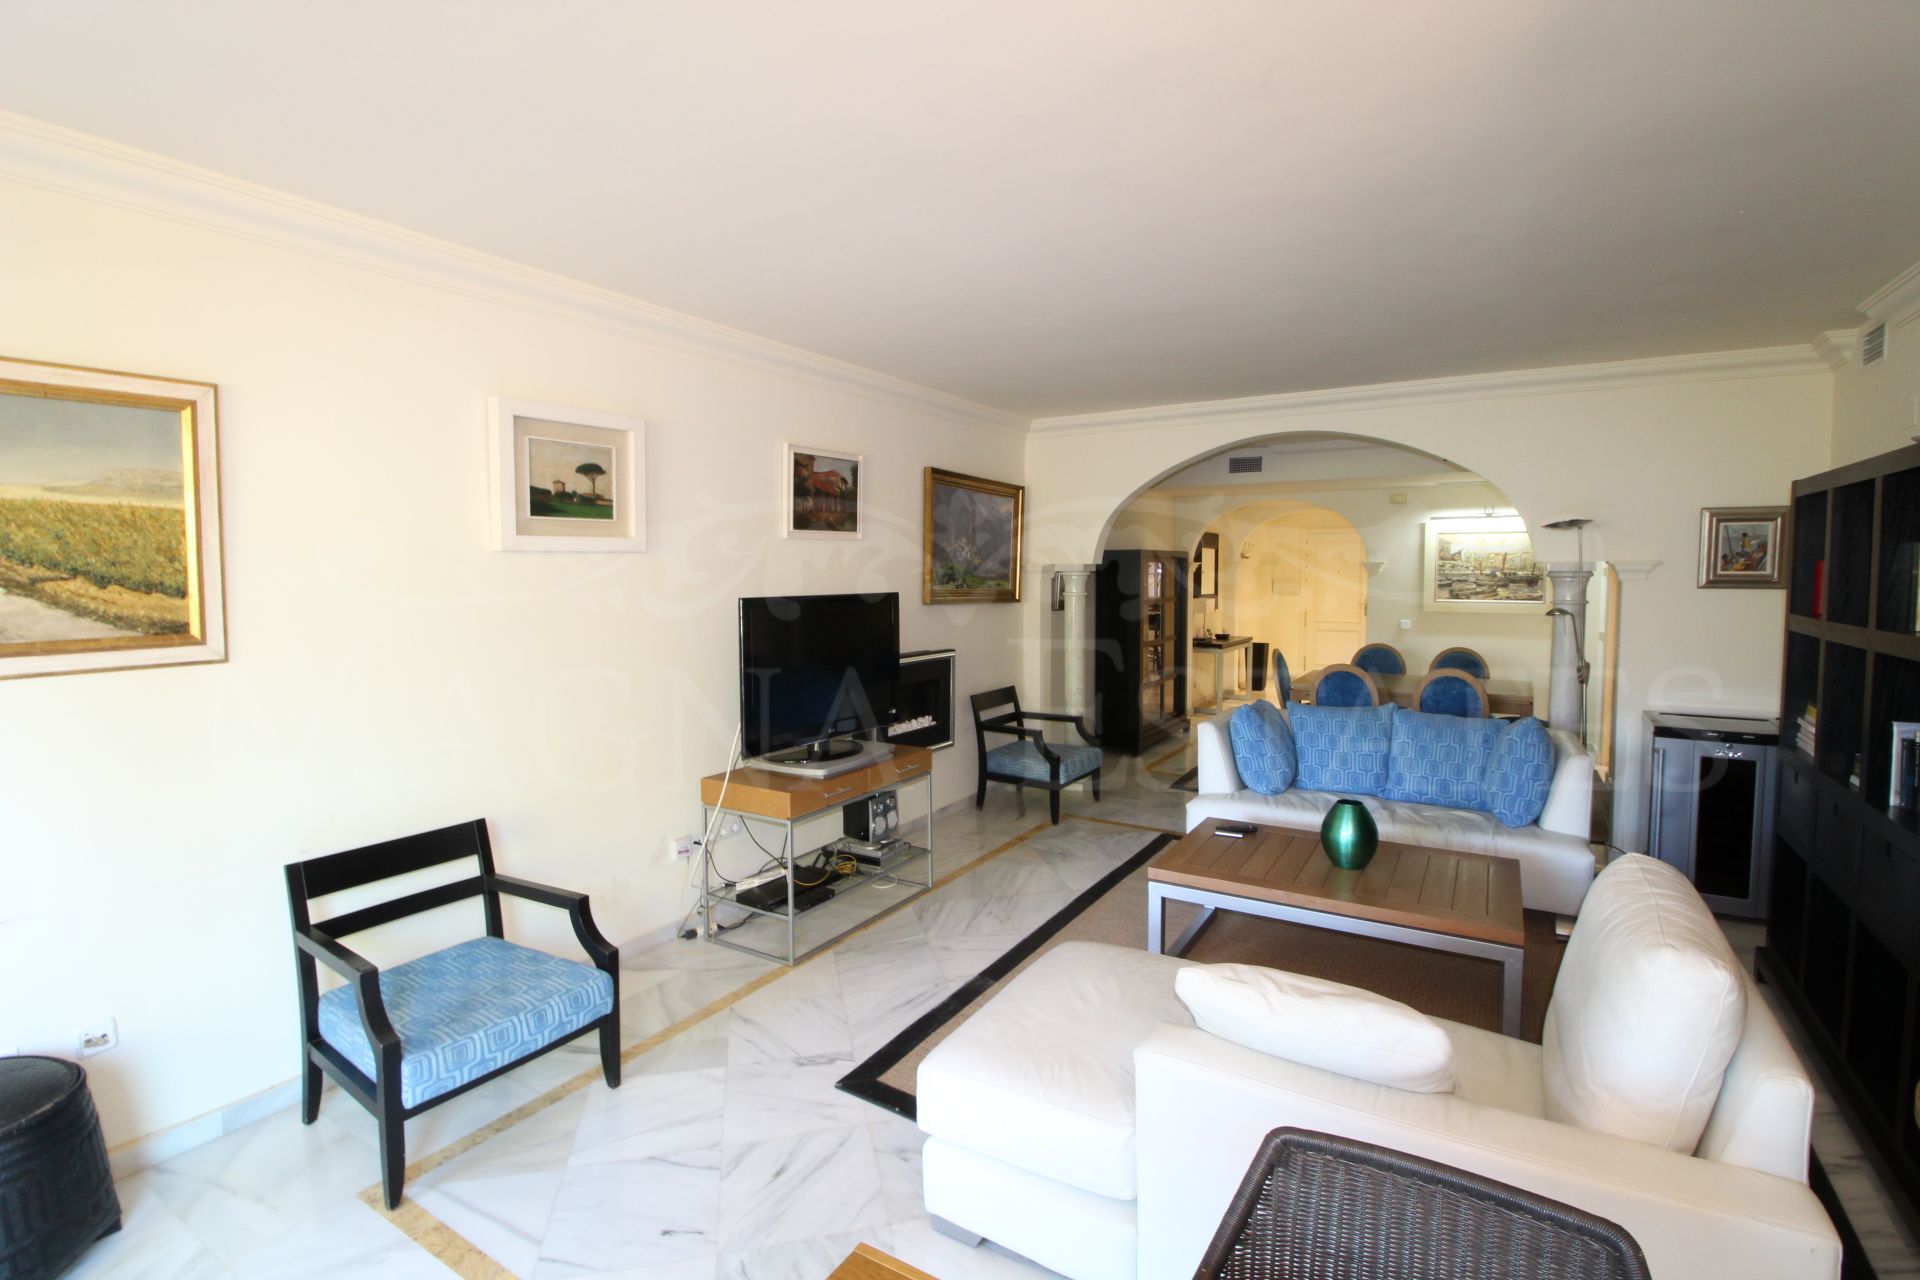 2 bedroom apartment in Magna Marbella, with 2 golf shares included